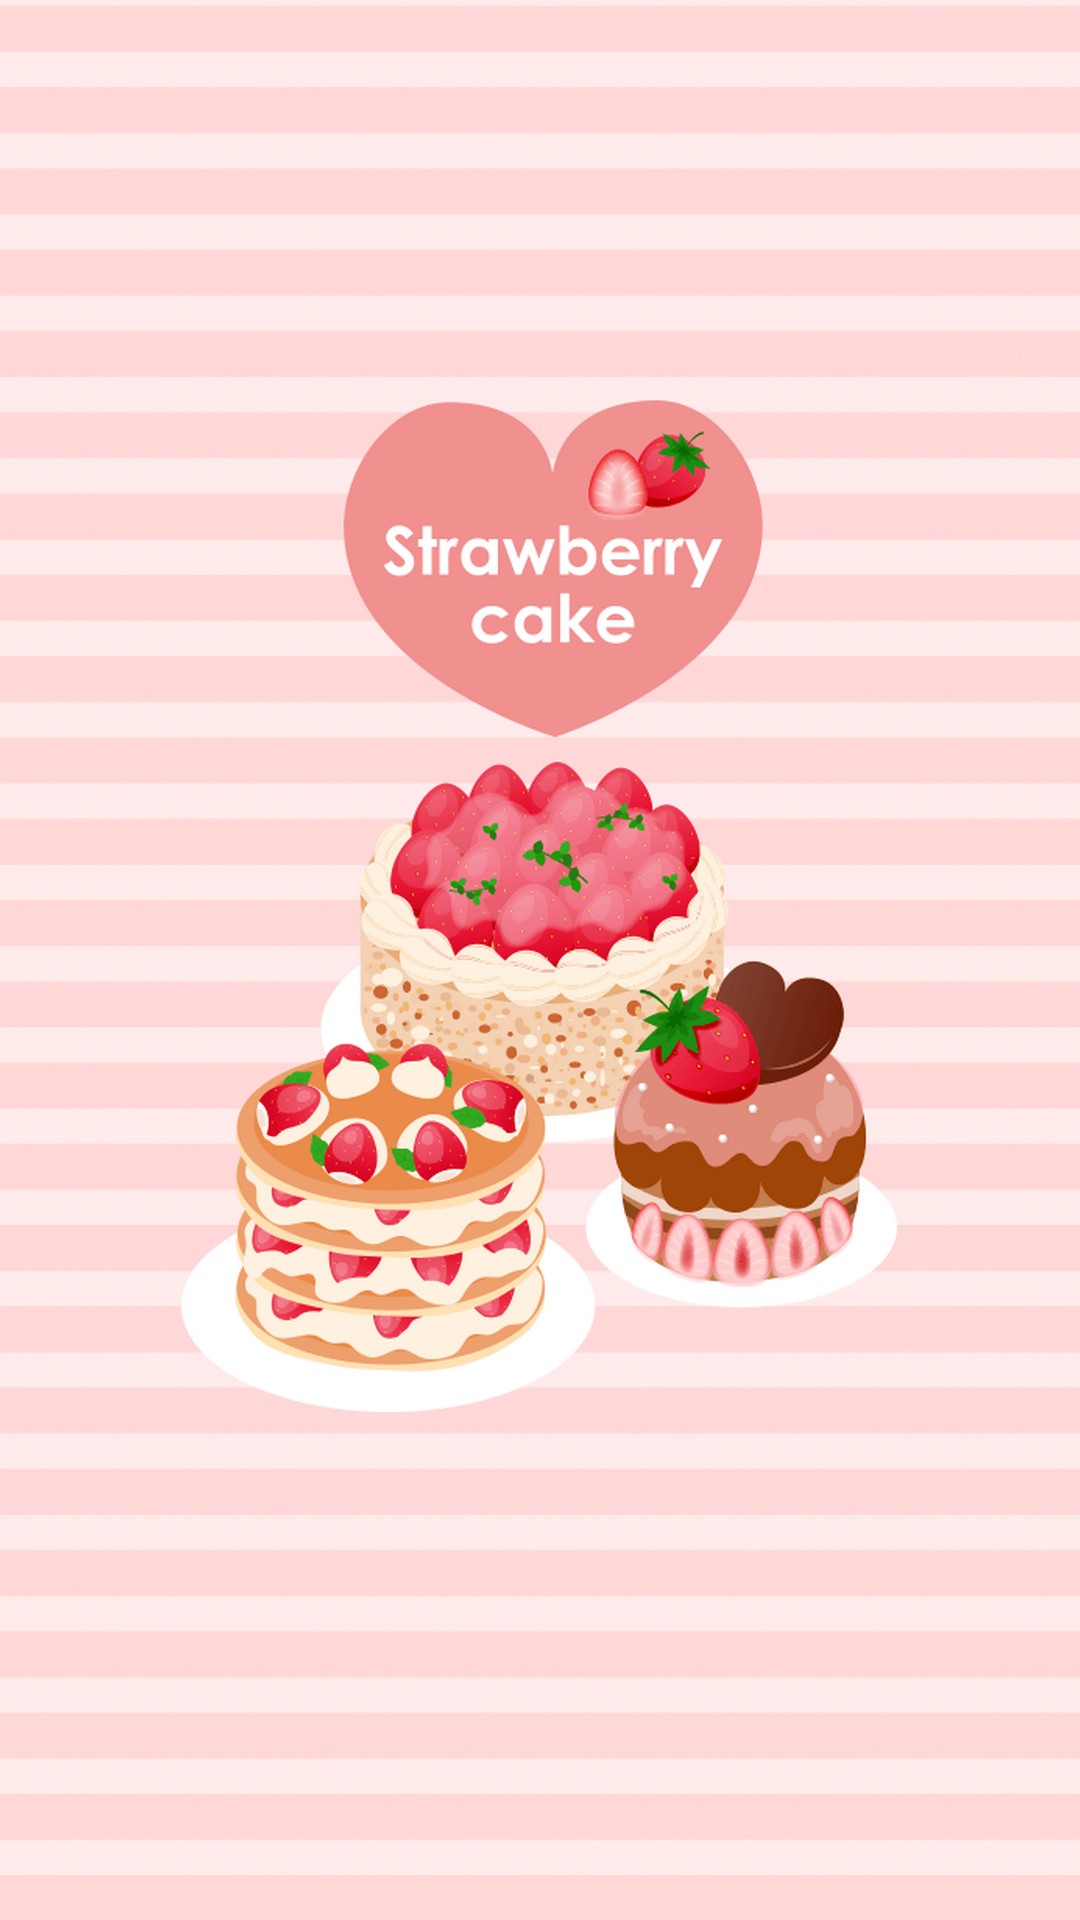 Strawberry Cake iPhone Wallpaper in HD with high-resolution 1080x1920 pixel. You can set as wallpaper for Apple iPhone X, XS Max, XR, 8, 7, 6, SE, iPad. Enjoy and share your favorite HD wallpapers and background images